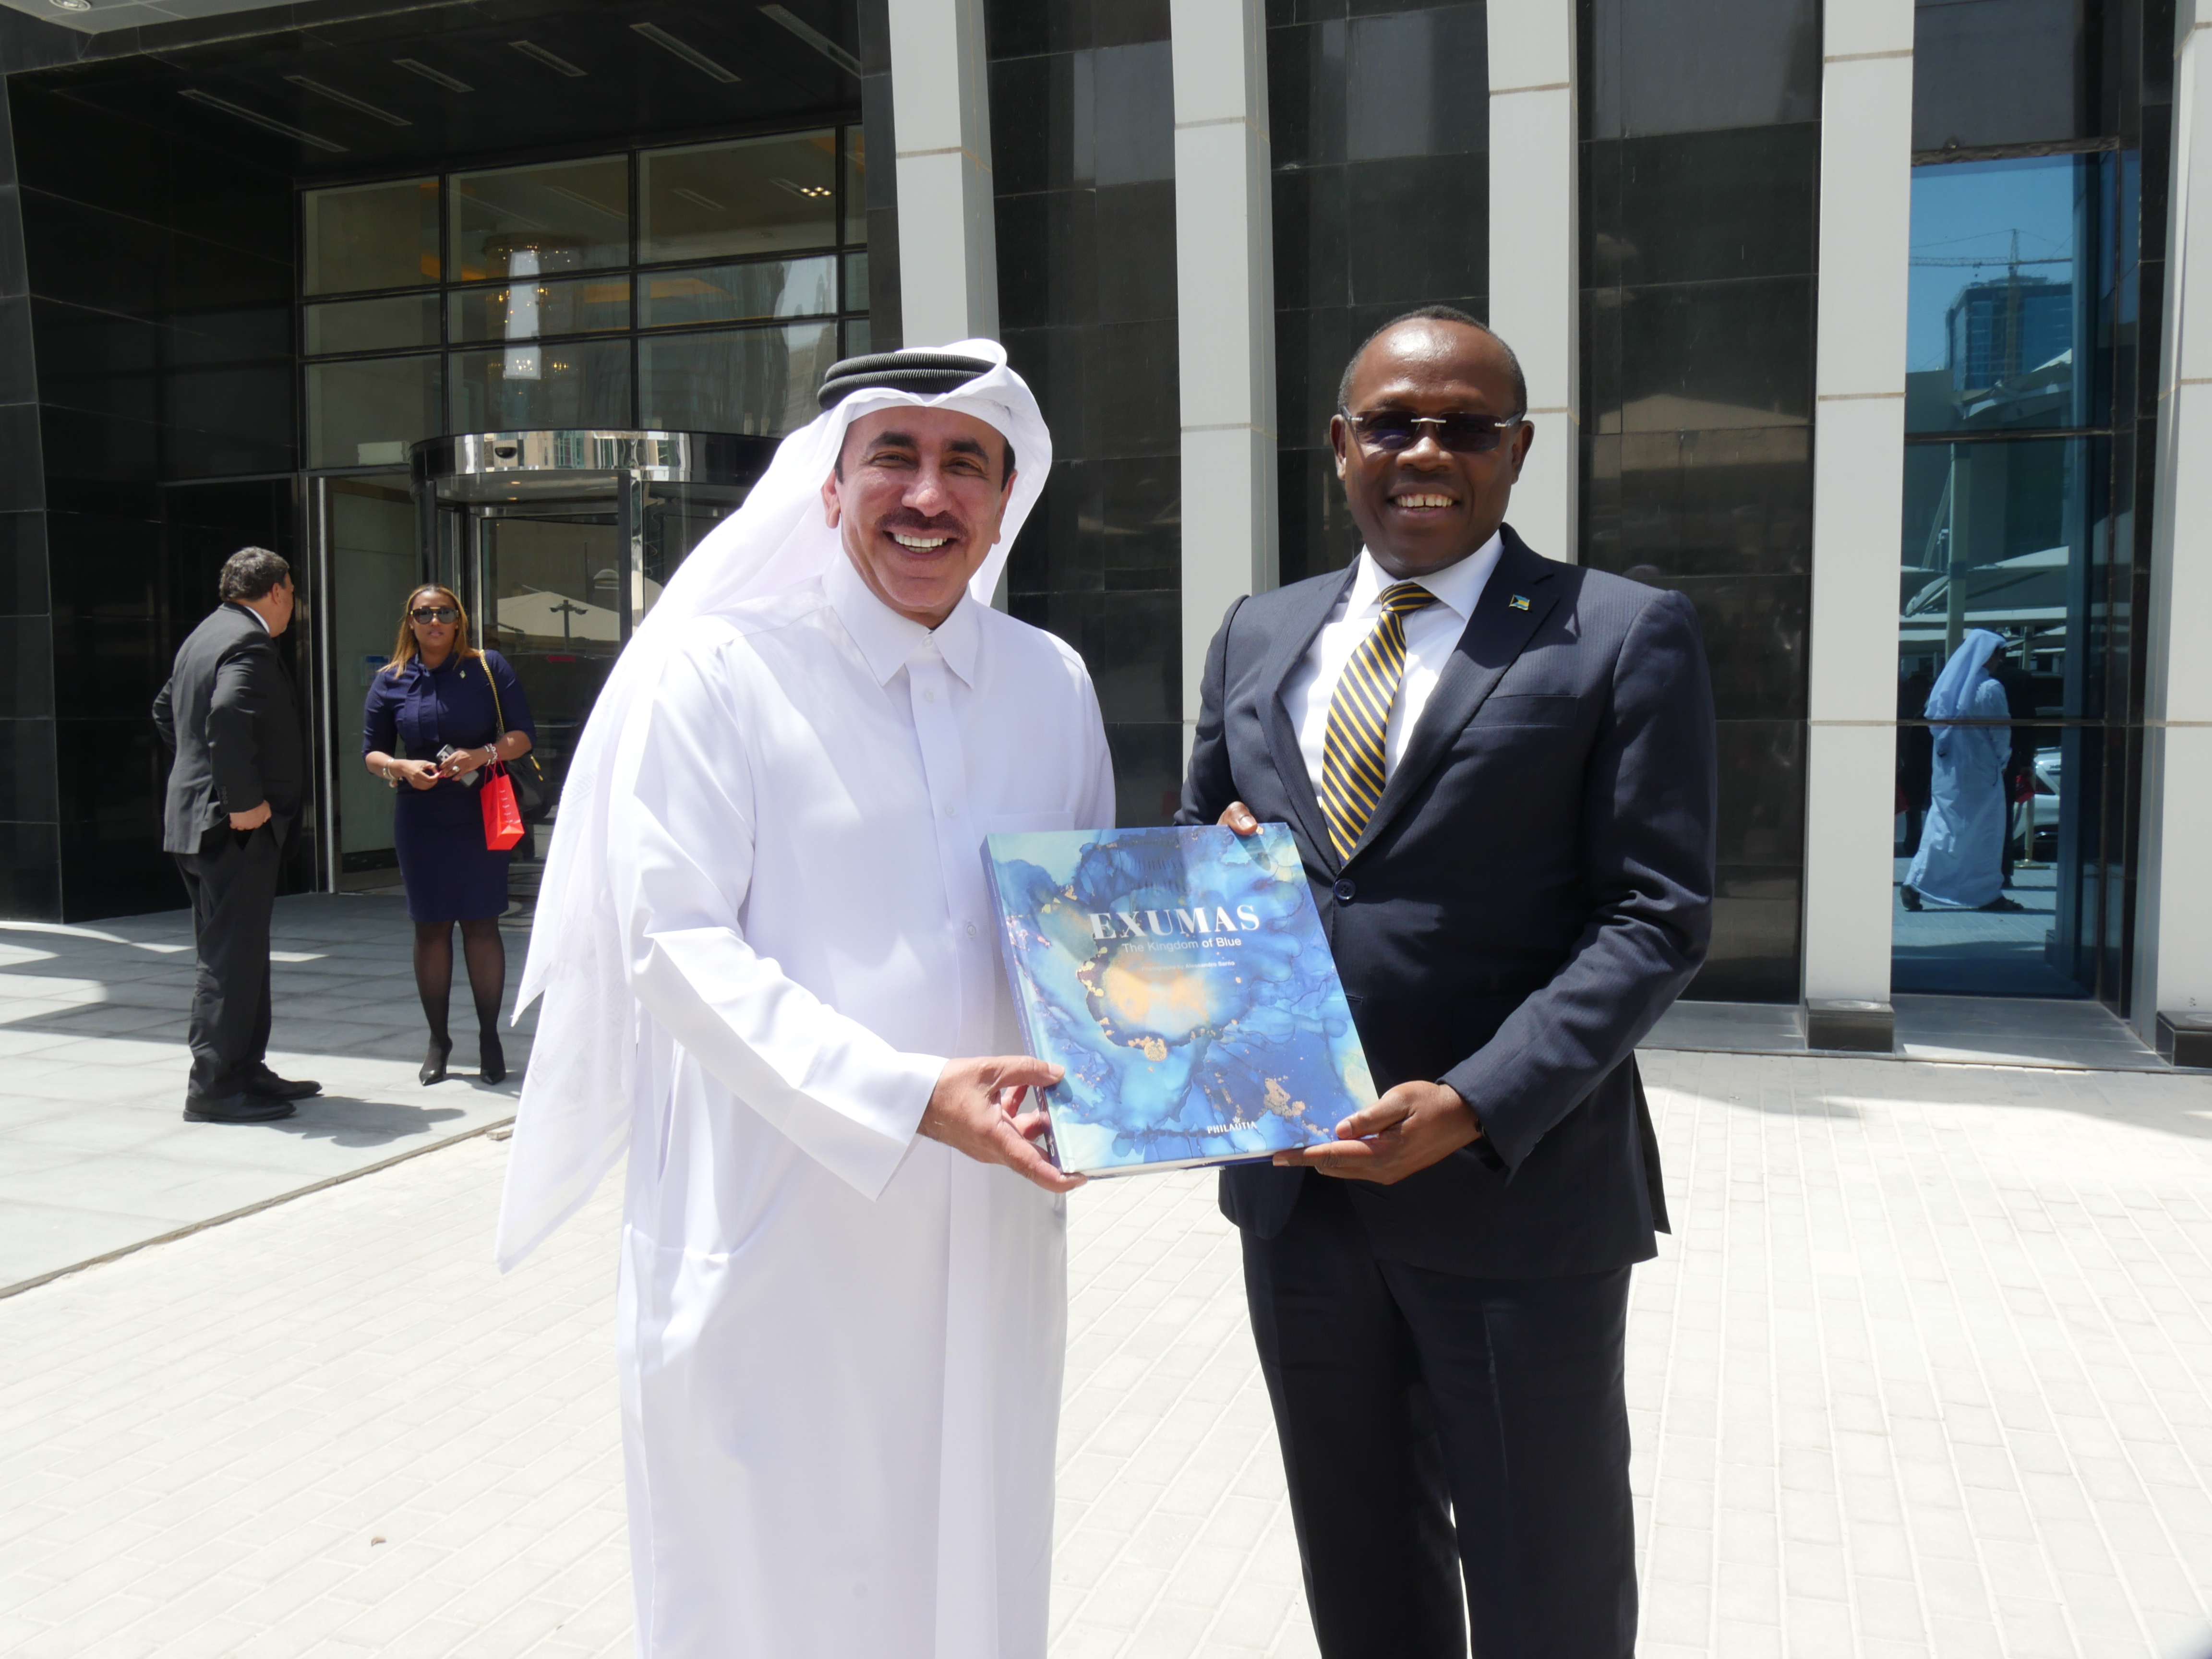 2dpm presents a gift to qatar minister of transport